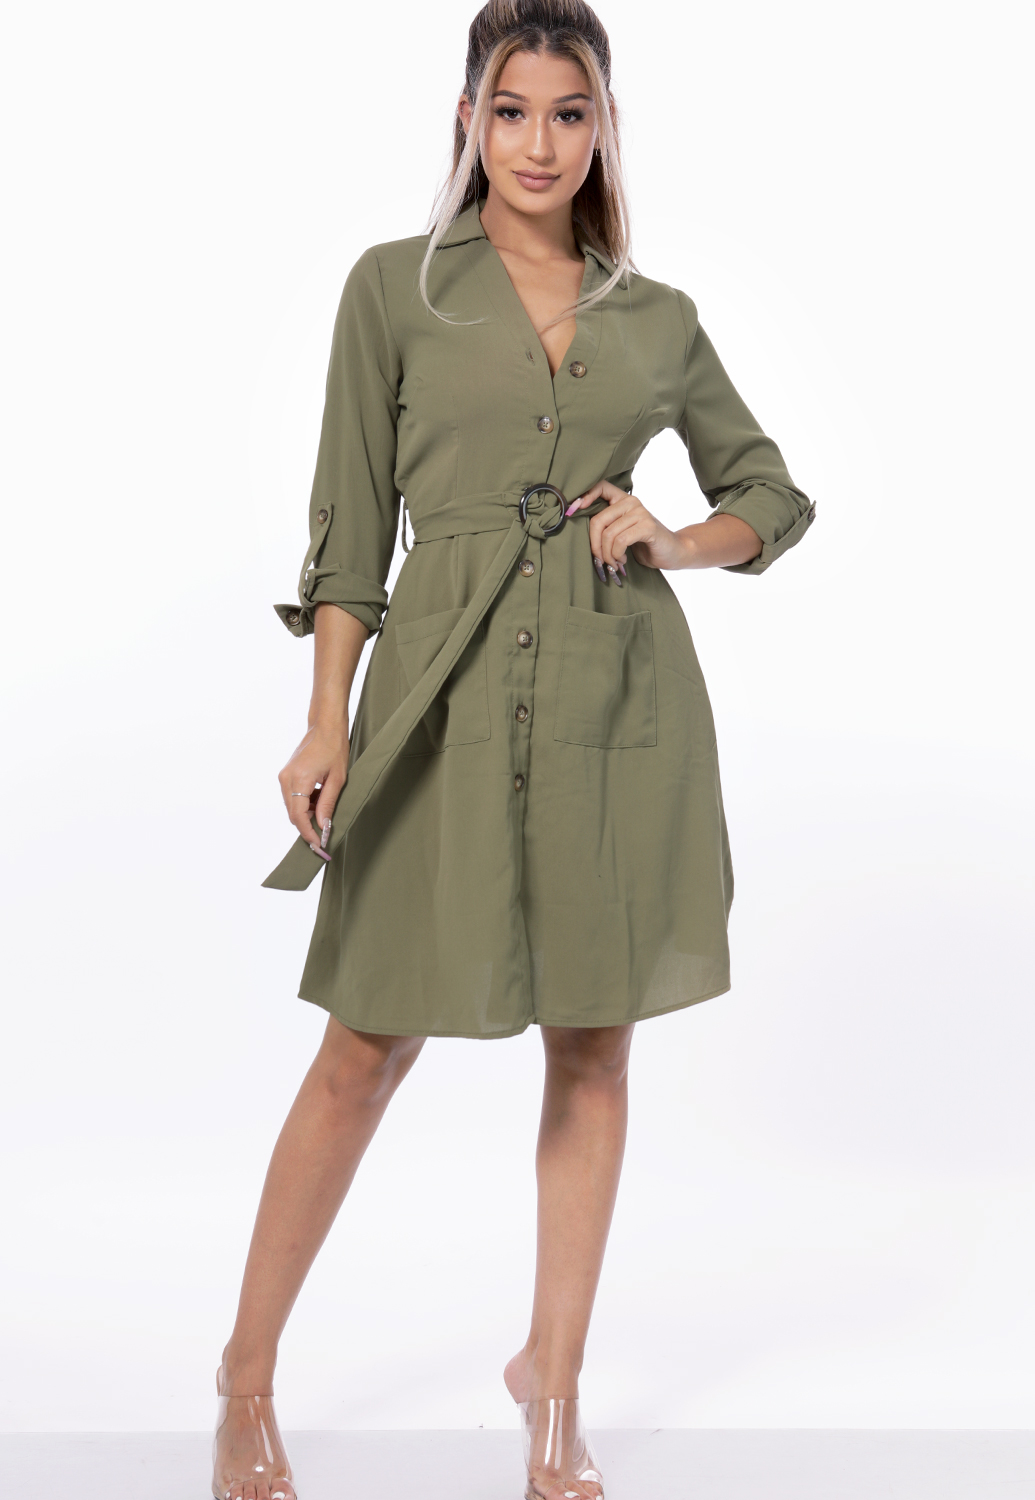 Belted Button Up Dress